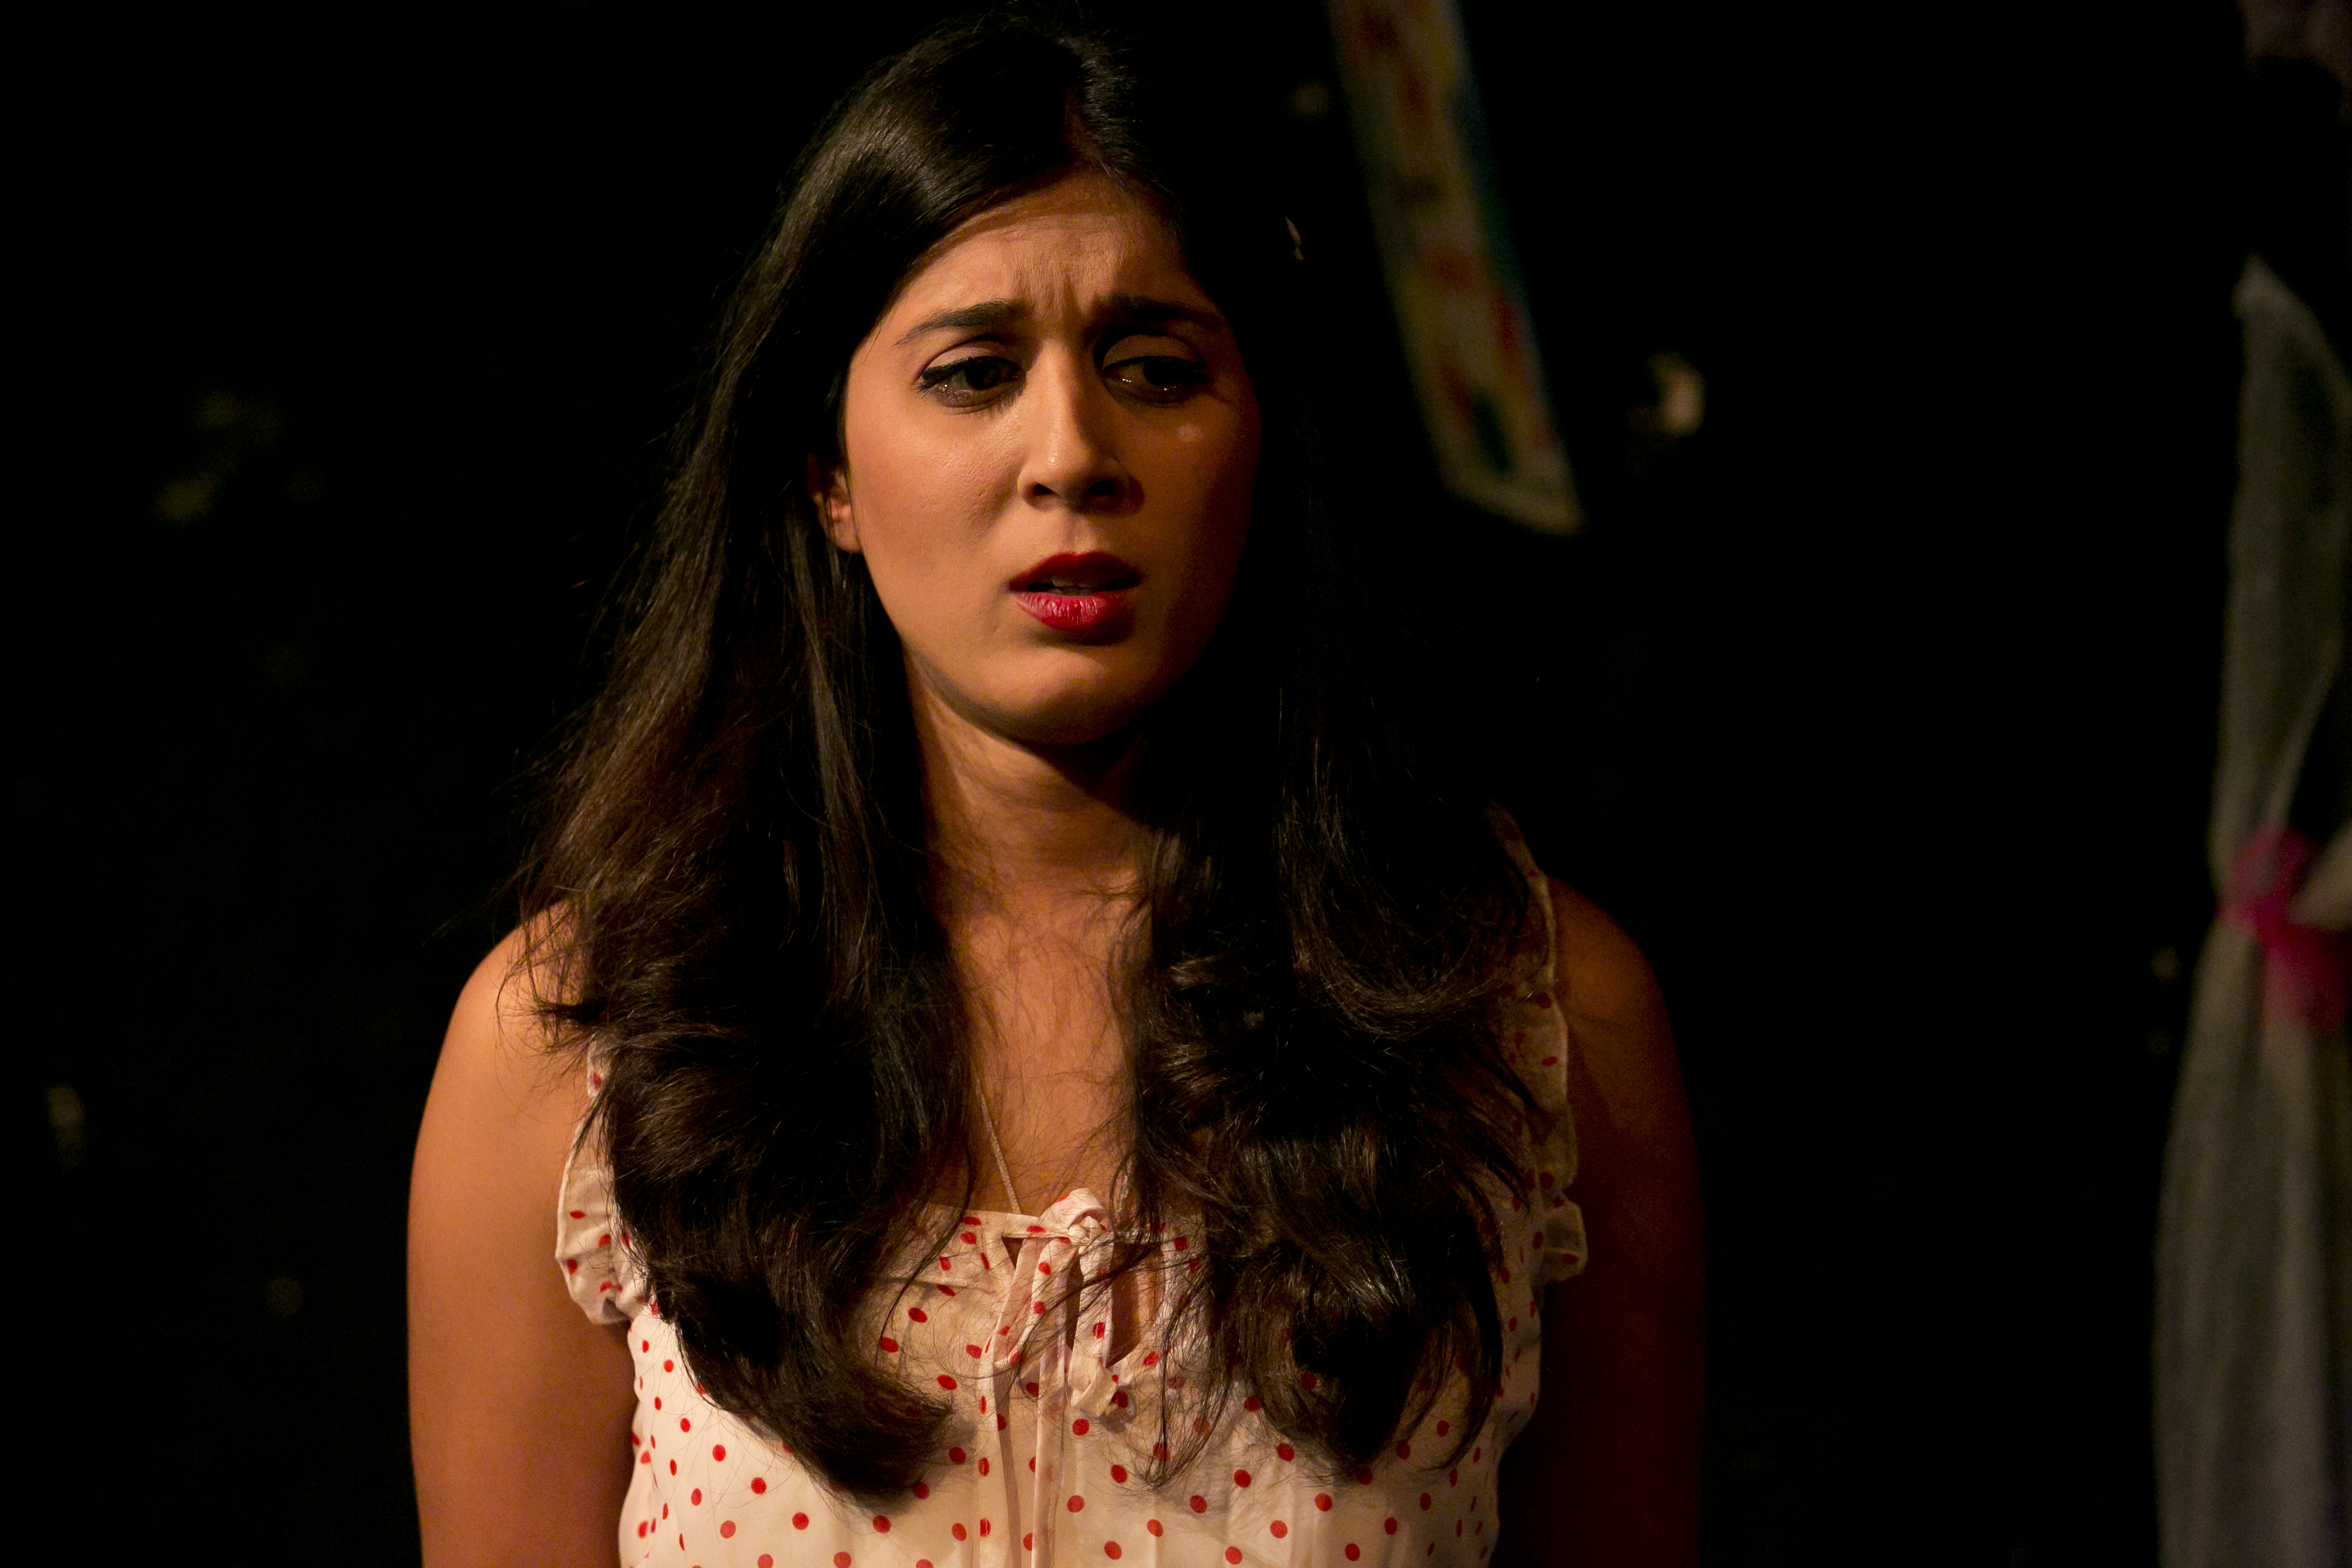 Amanda Soroudi in a still from the On-Stage production of 